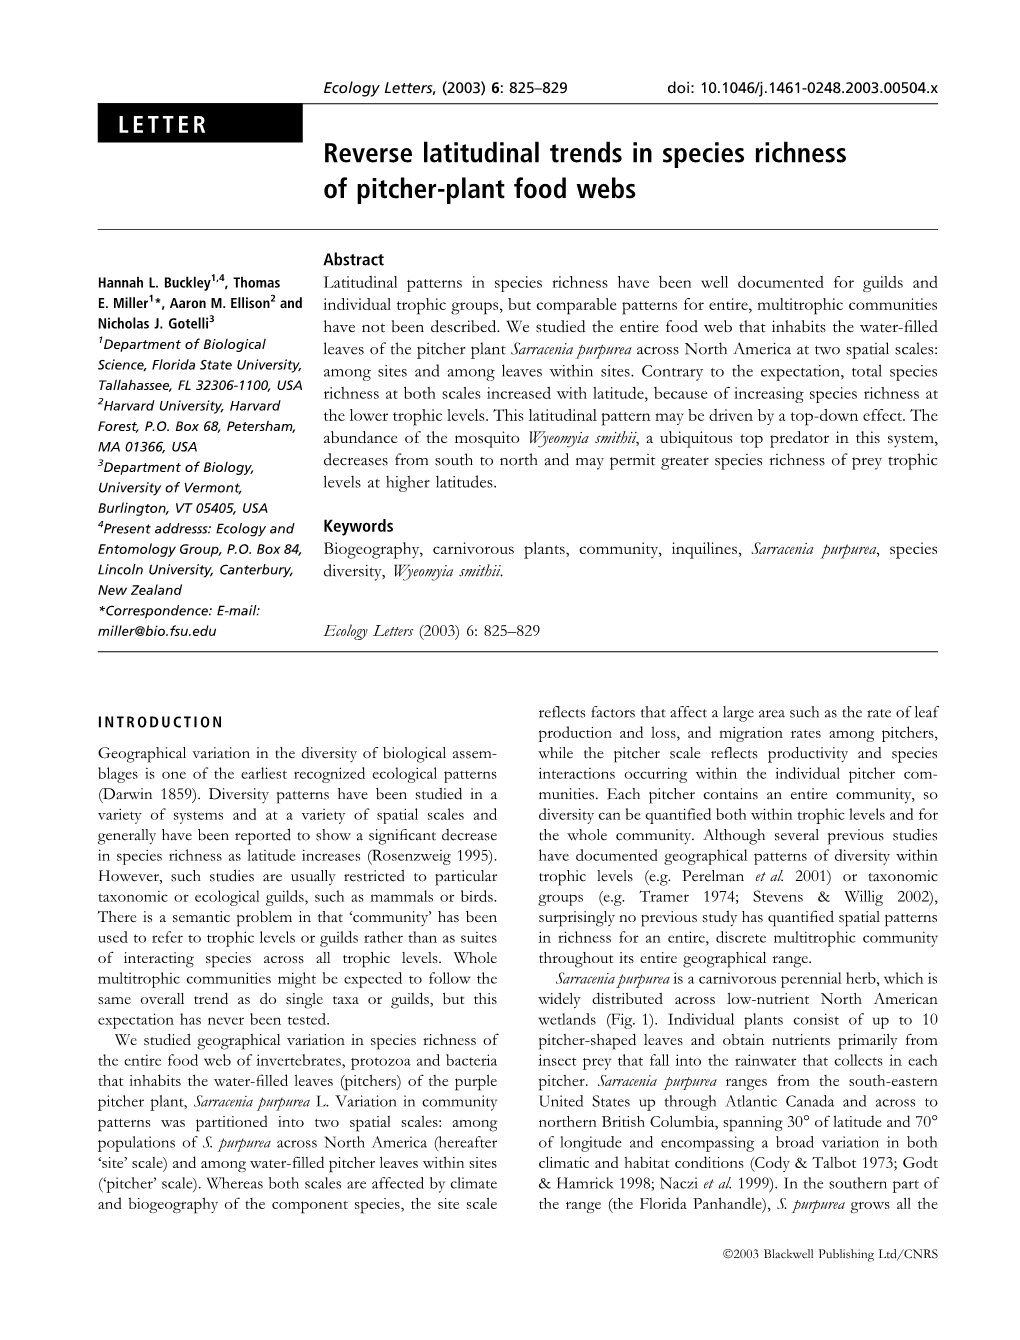 Reverse Latitudinal Trends in Species Richness of Pitcher-Plant Food Webs